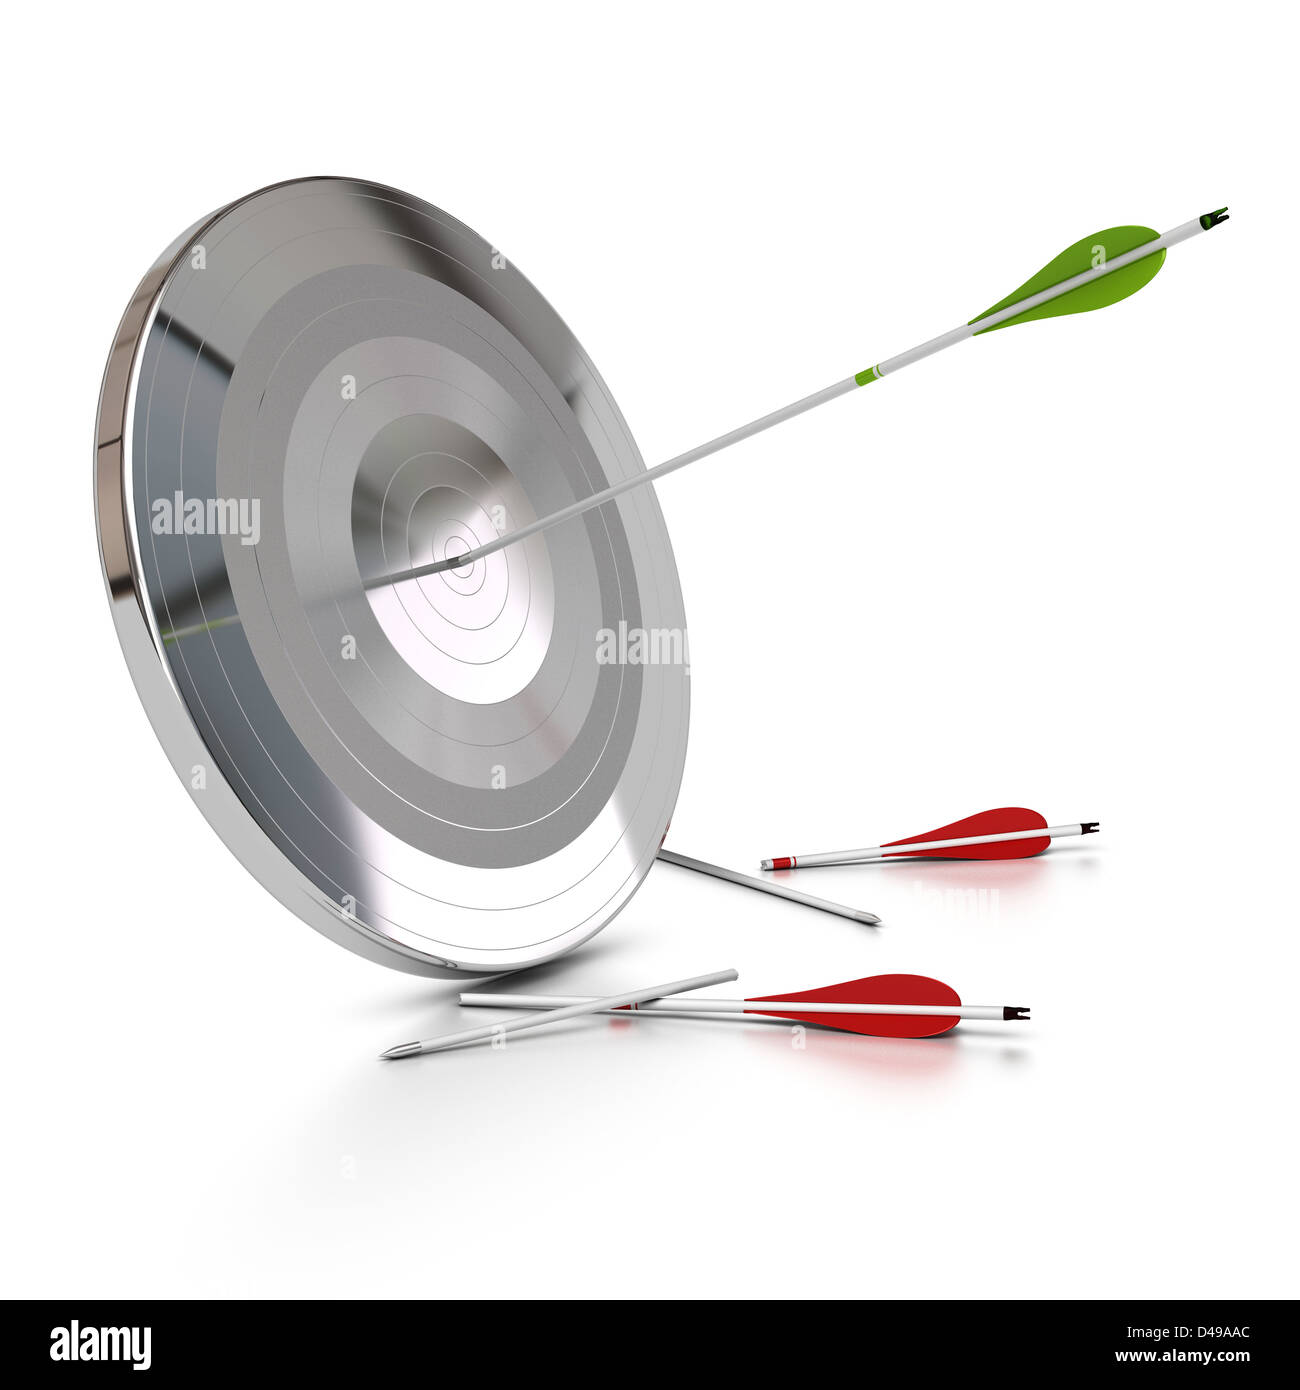 one metal target pierced by an green arrow, there is two red arrows broken on the floor, white background Stock Photo